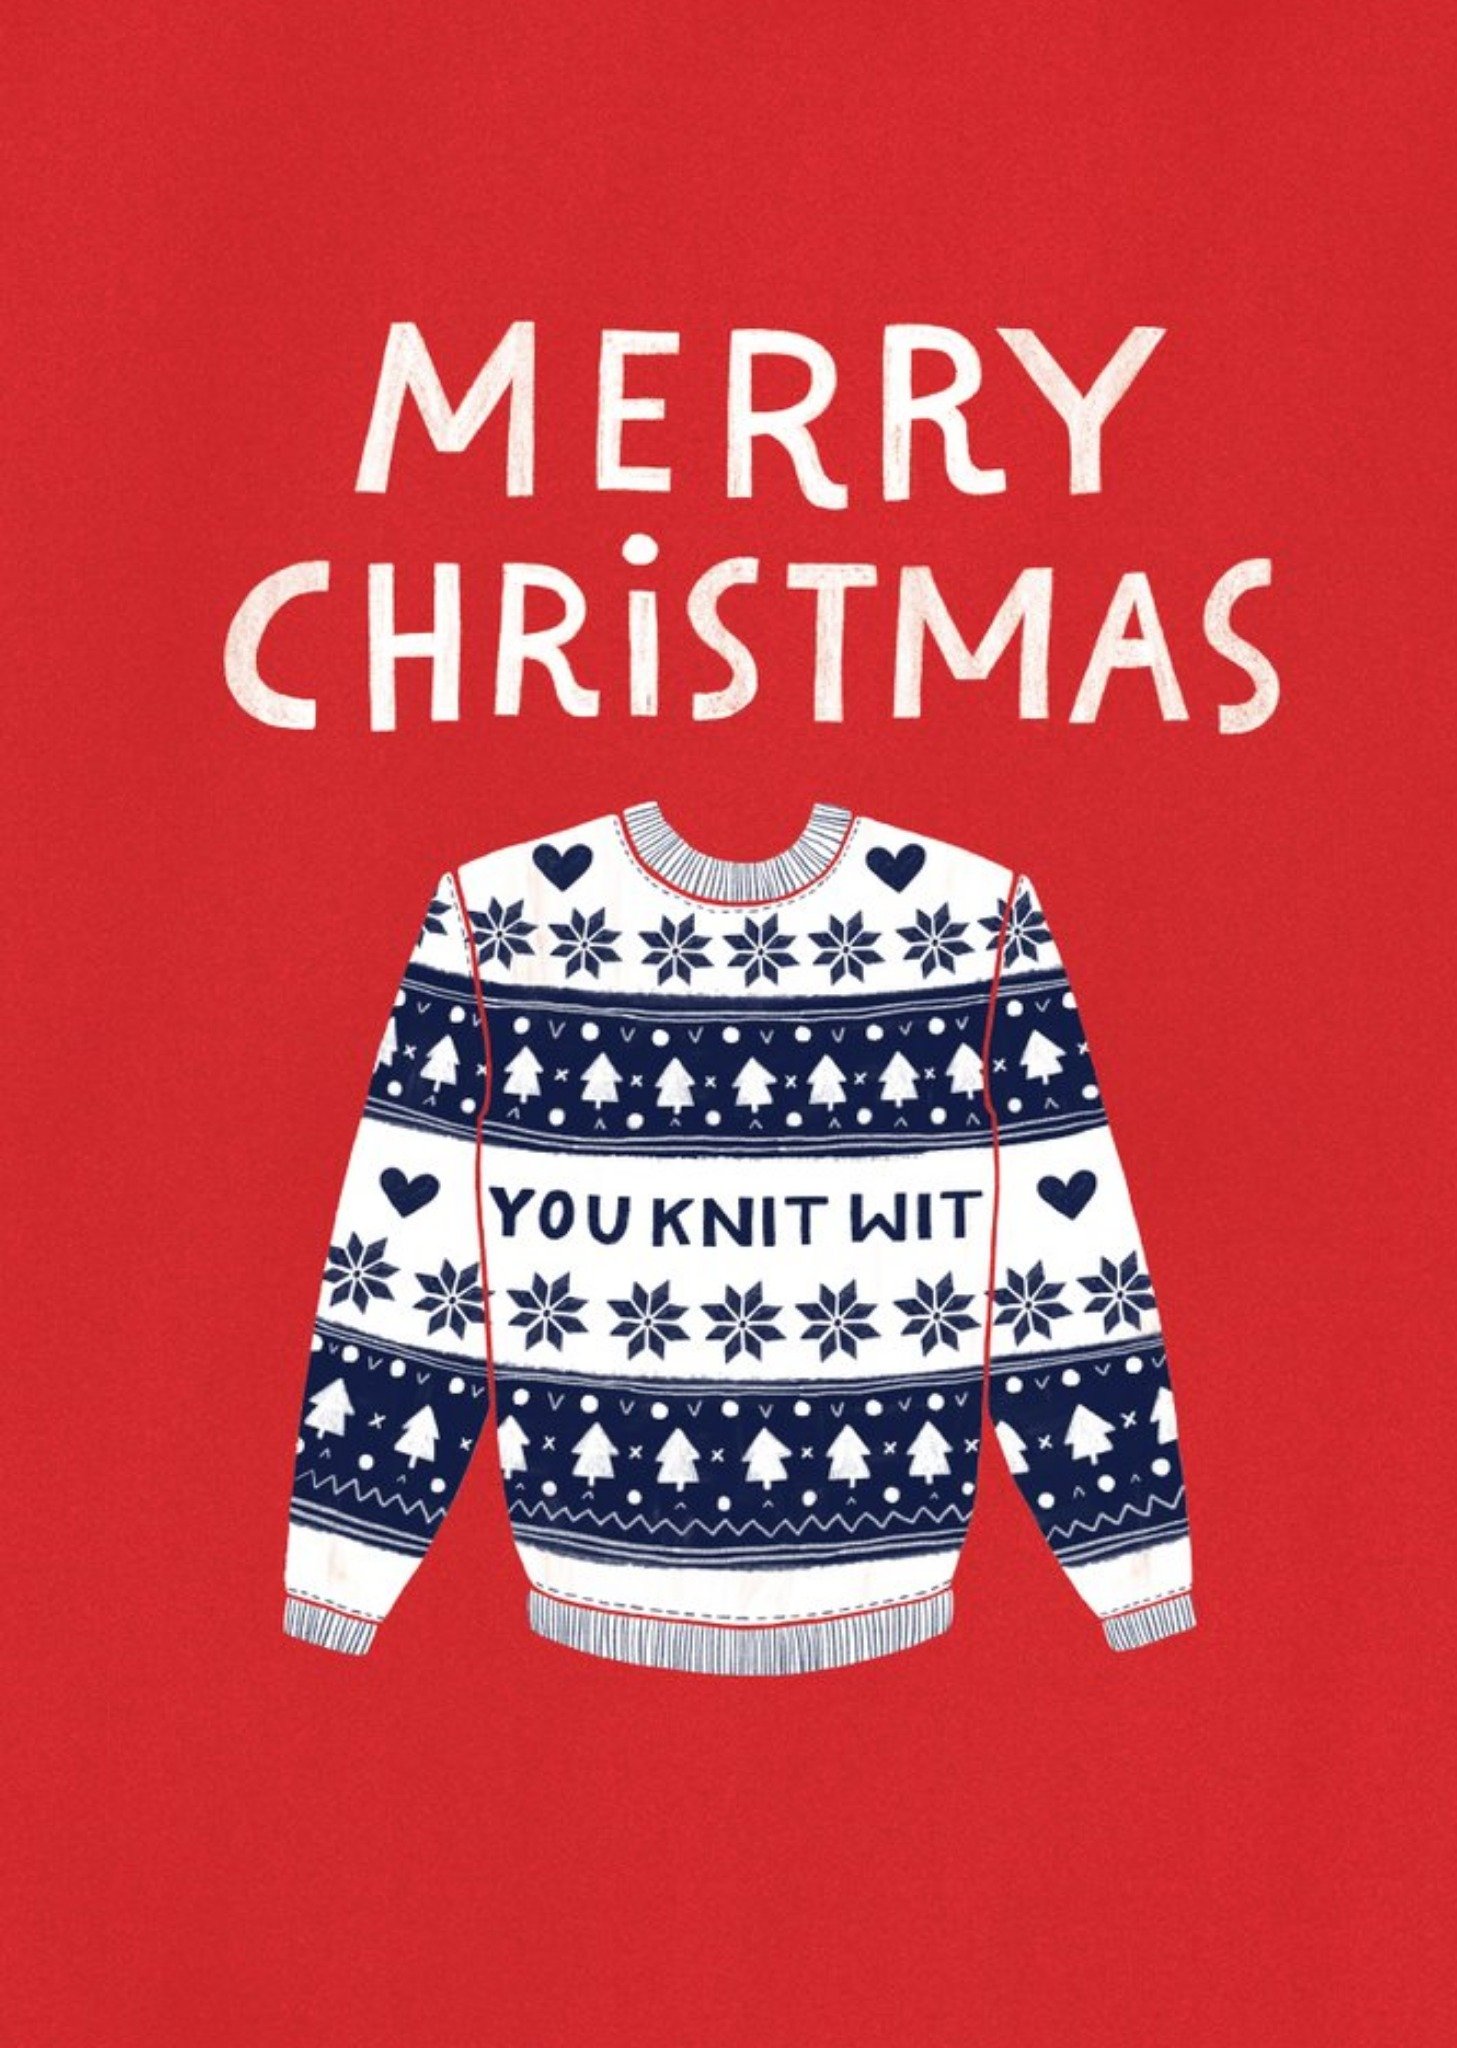 Cardy Club Merry Christmas Jumper Card, Large